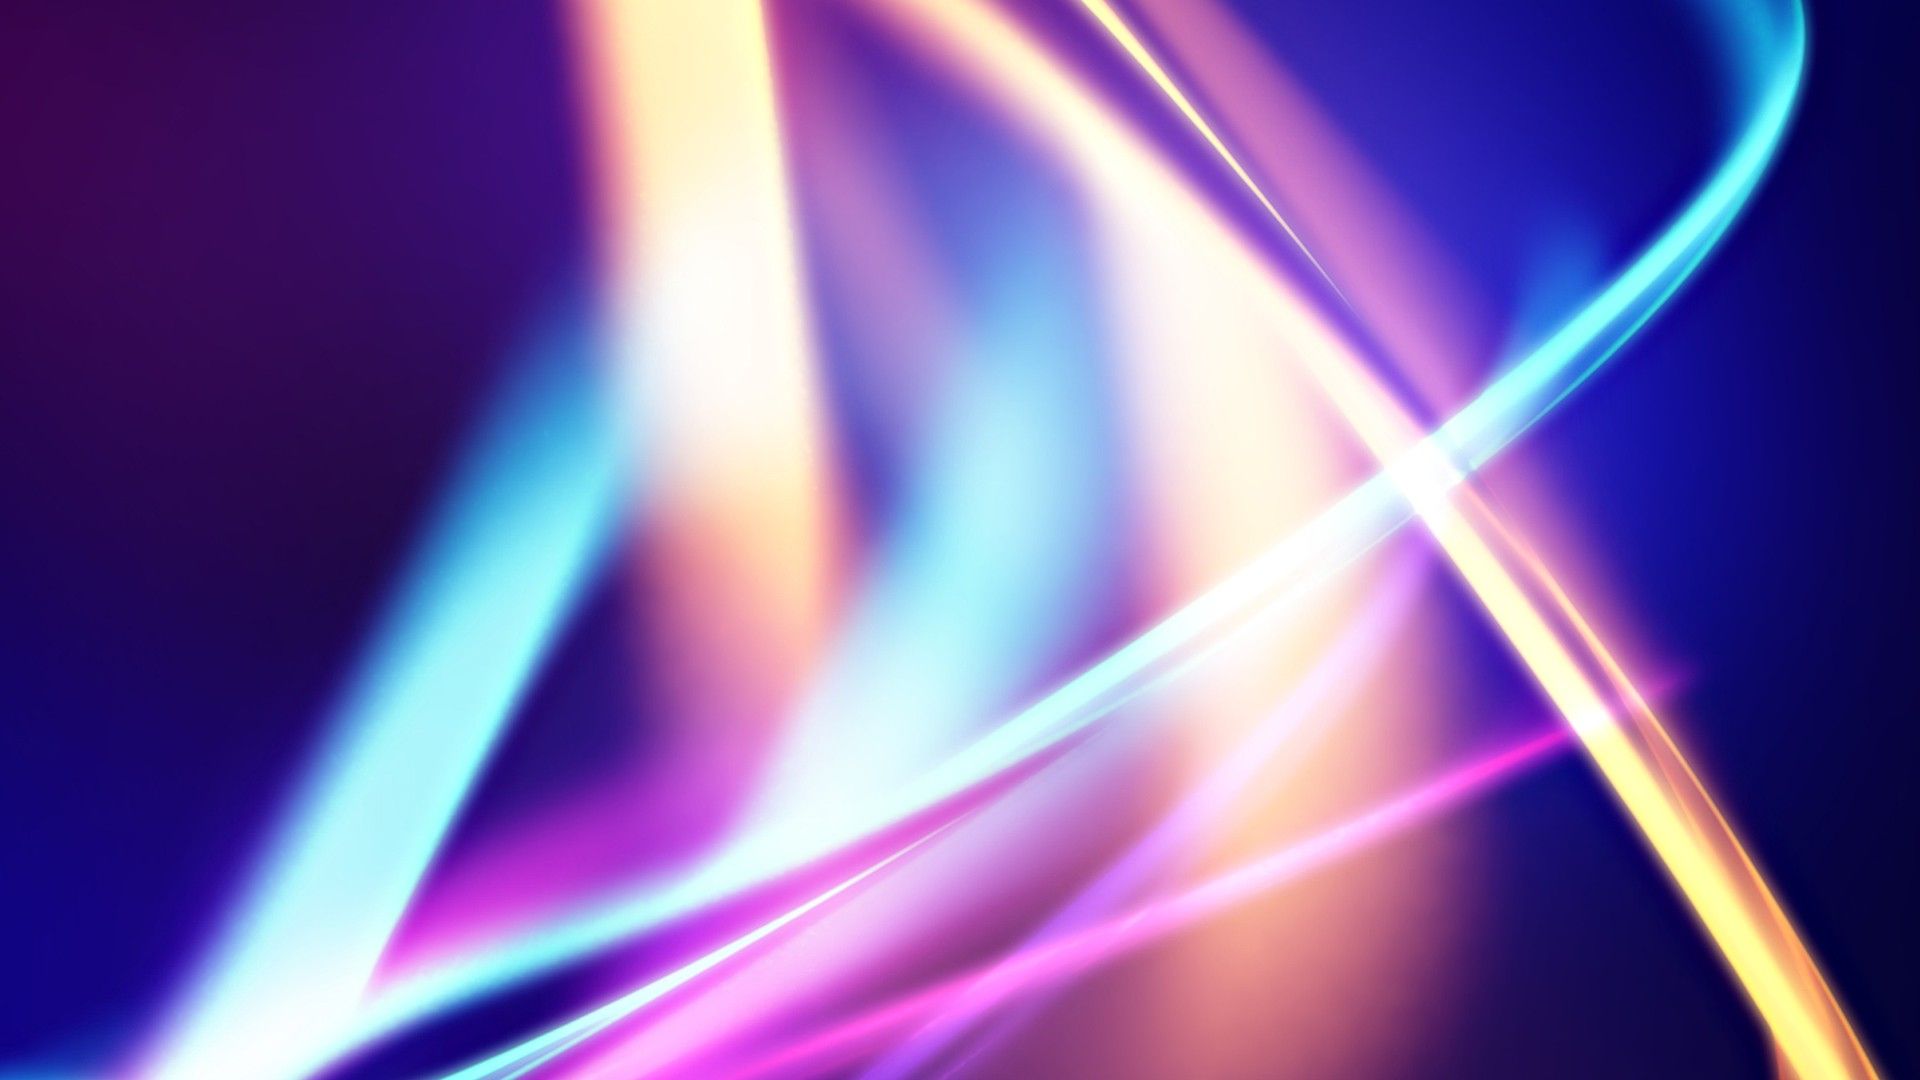 Abstract Neon Wallpaper HD HD .thewallpaper.co